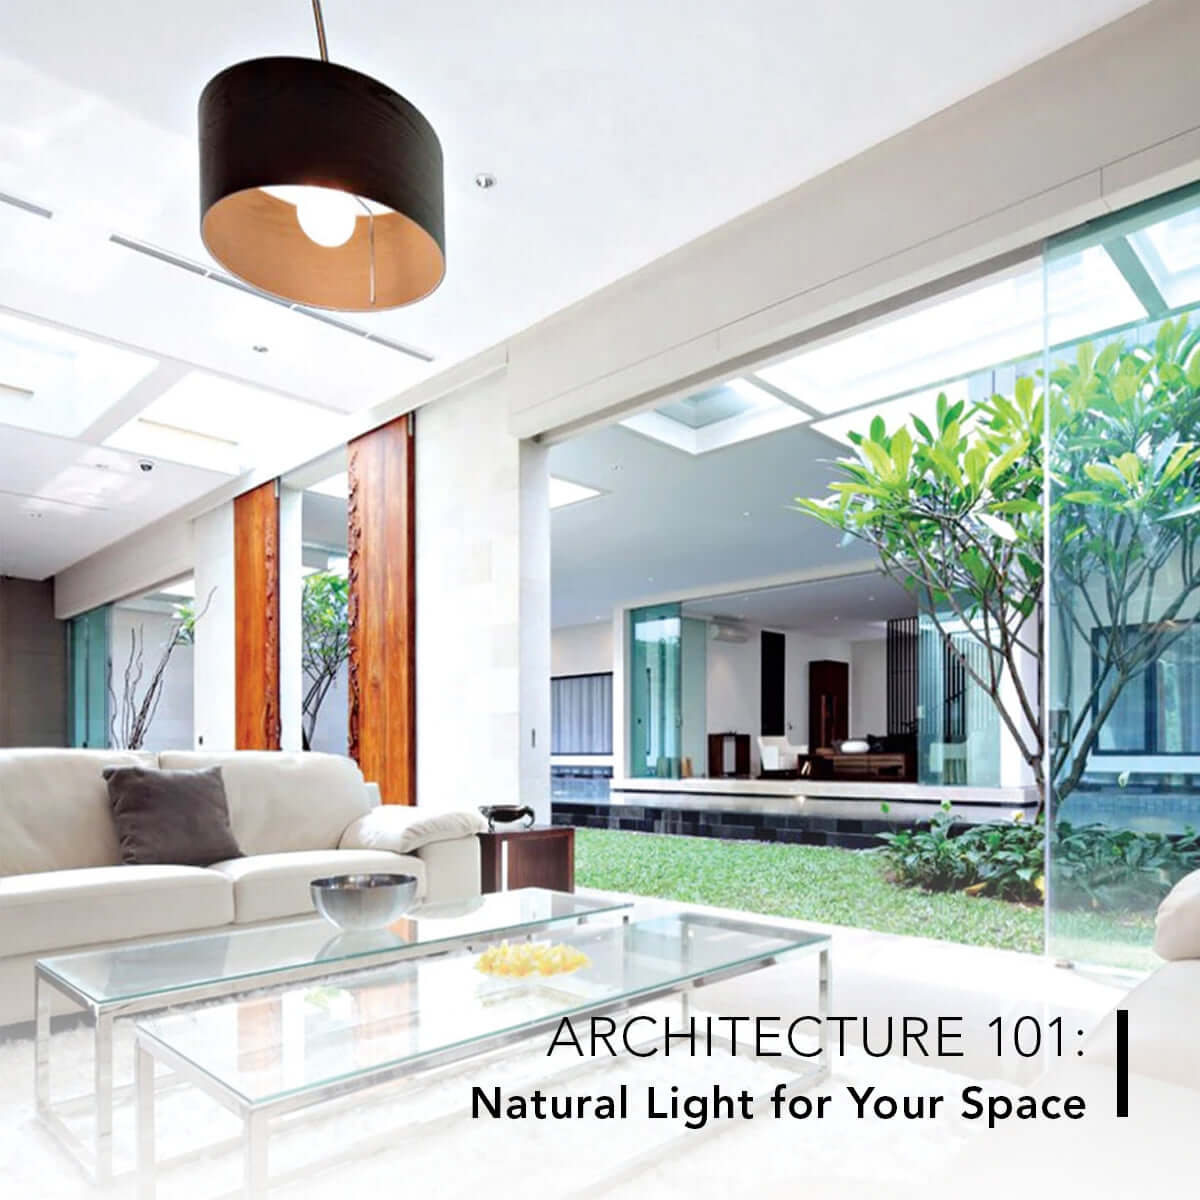 Architecture 101: Natural Light for Your Space